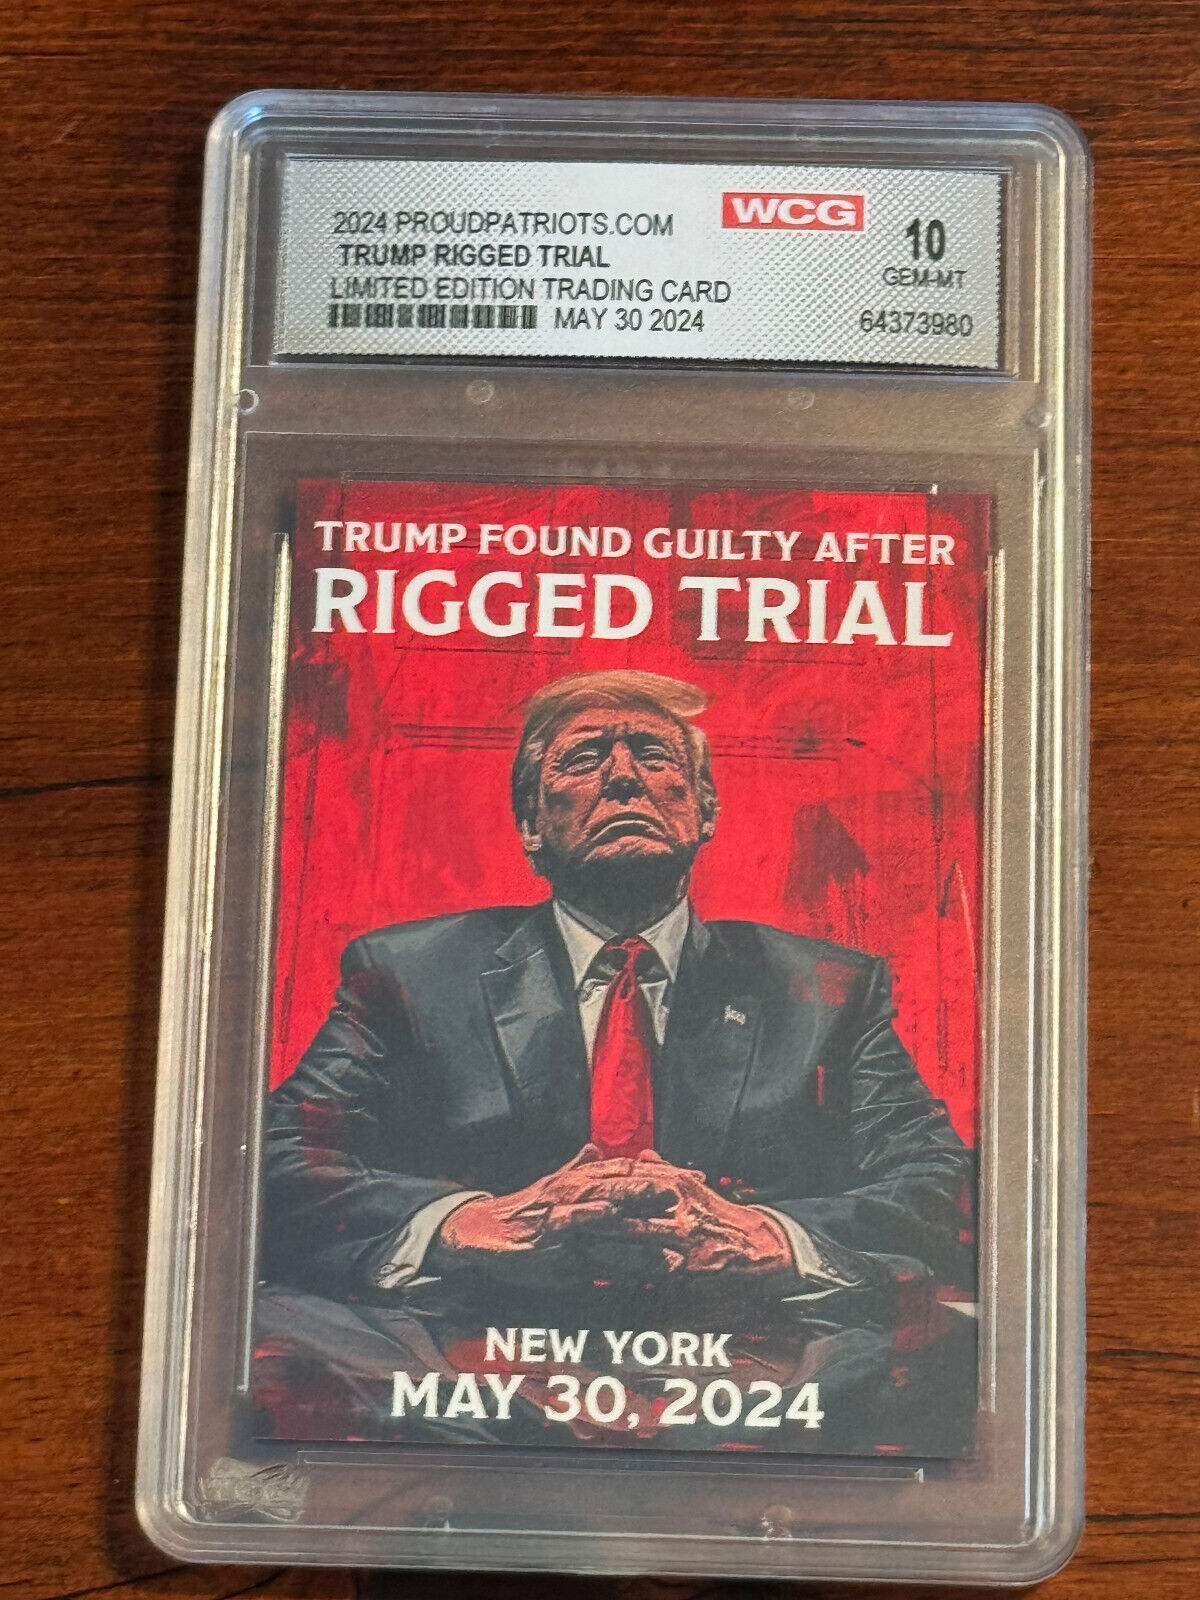 Donald Trump Gem Mint 10 “RIGGED TRIAL” Trading Card New York May 30 2024  NEW